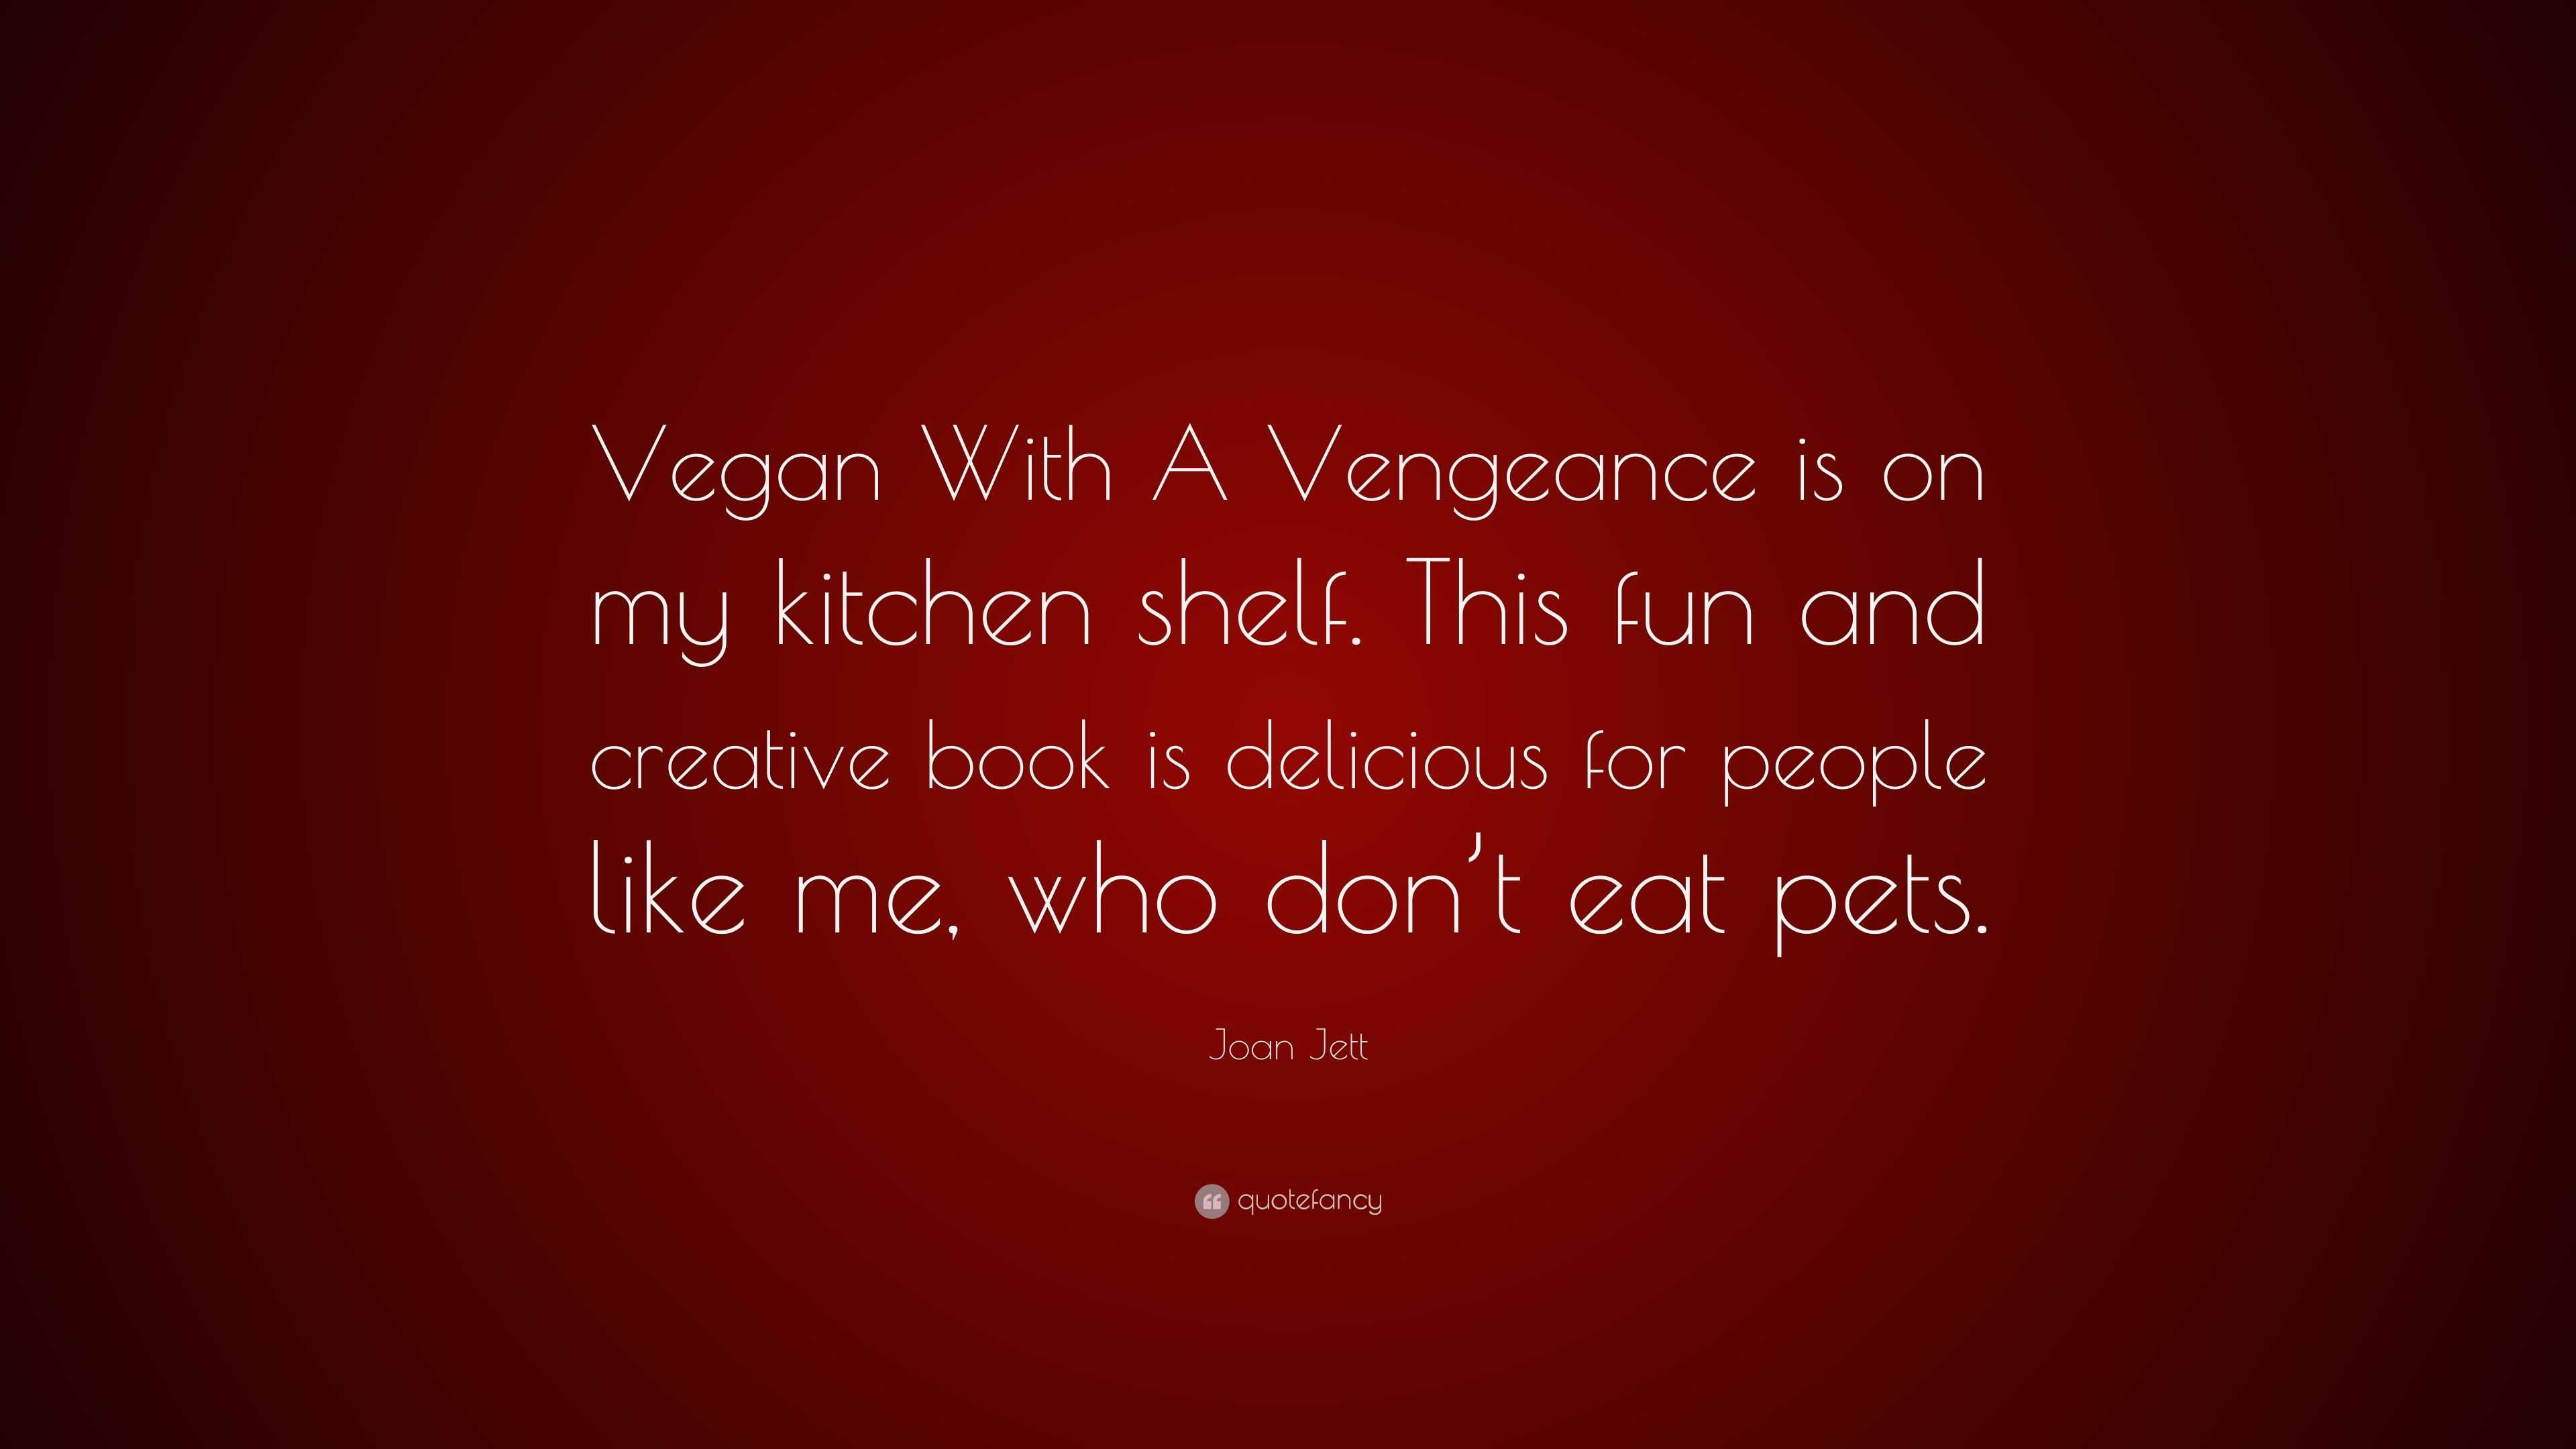 Joan Jett Quote: “Vegan With A Vengeance is on my kitchen shelf. This fun  and creative book is delicious for people like me, who don't eat...”